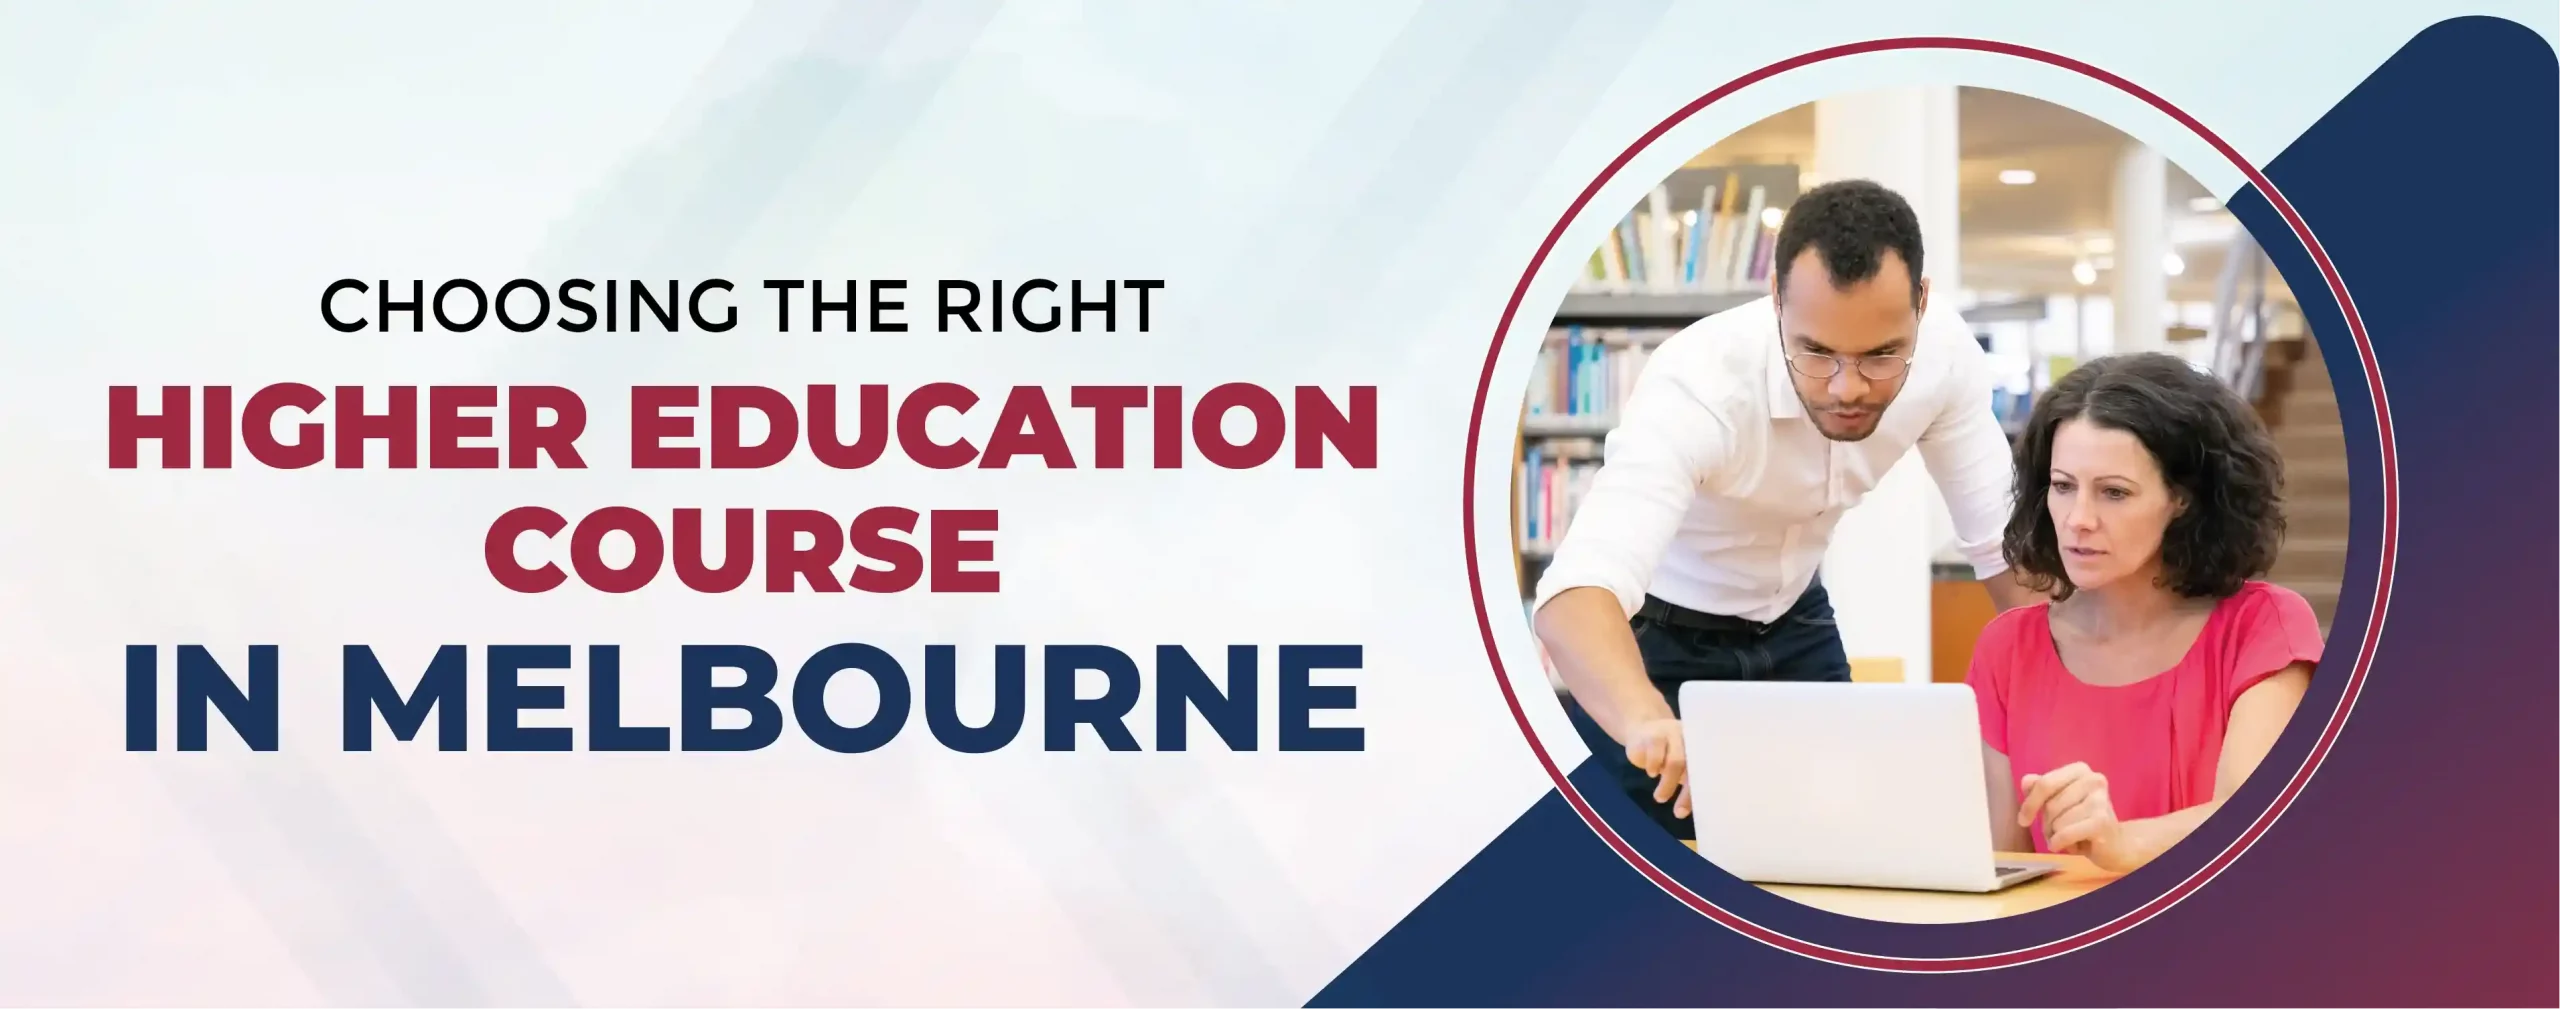 Choosing the Right Higher Education Course in Melbourne